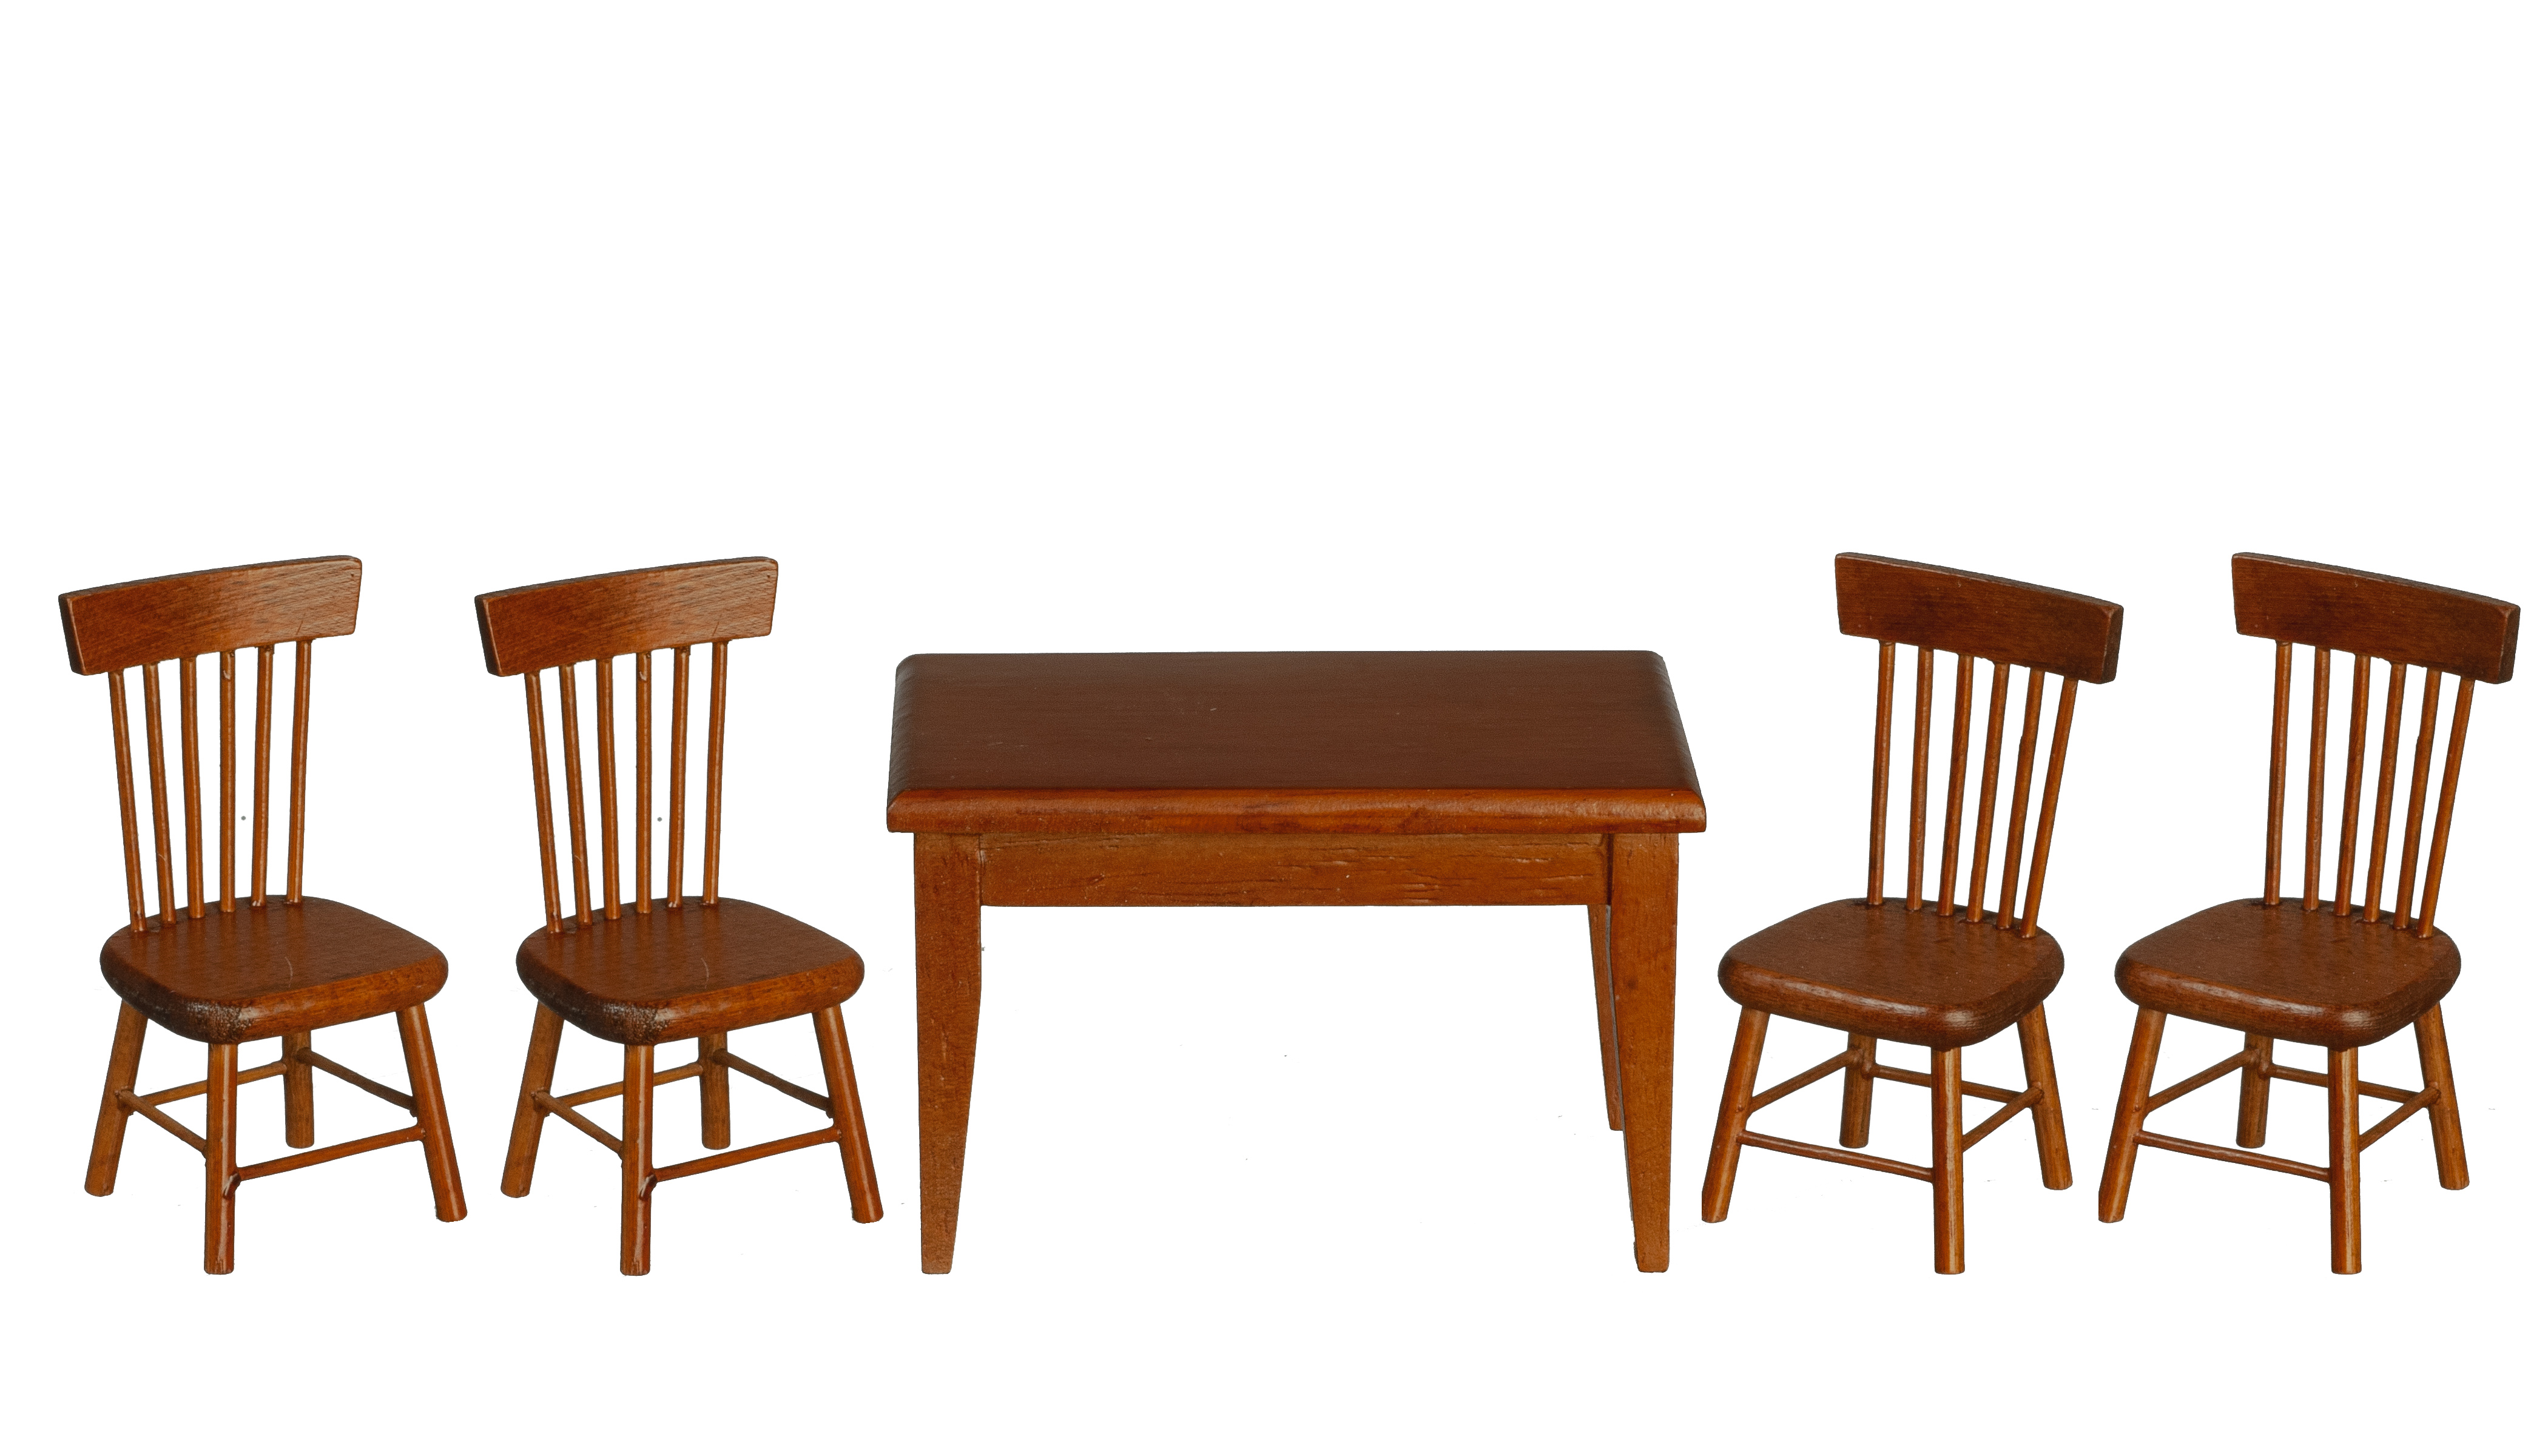 Table & 4 Chairs - Walnut - 5pc